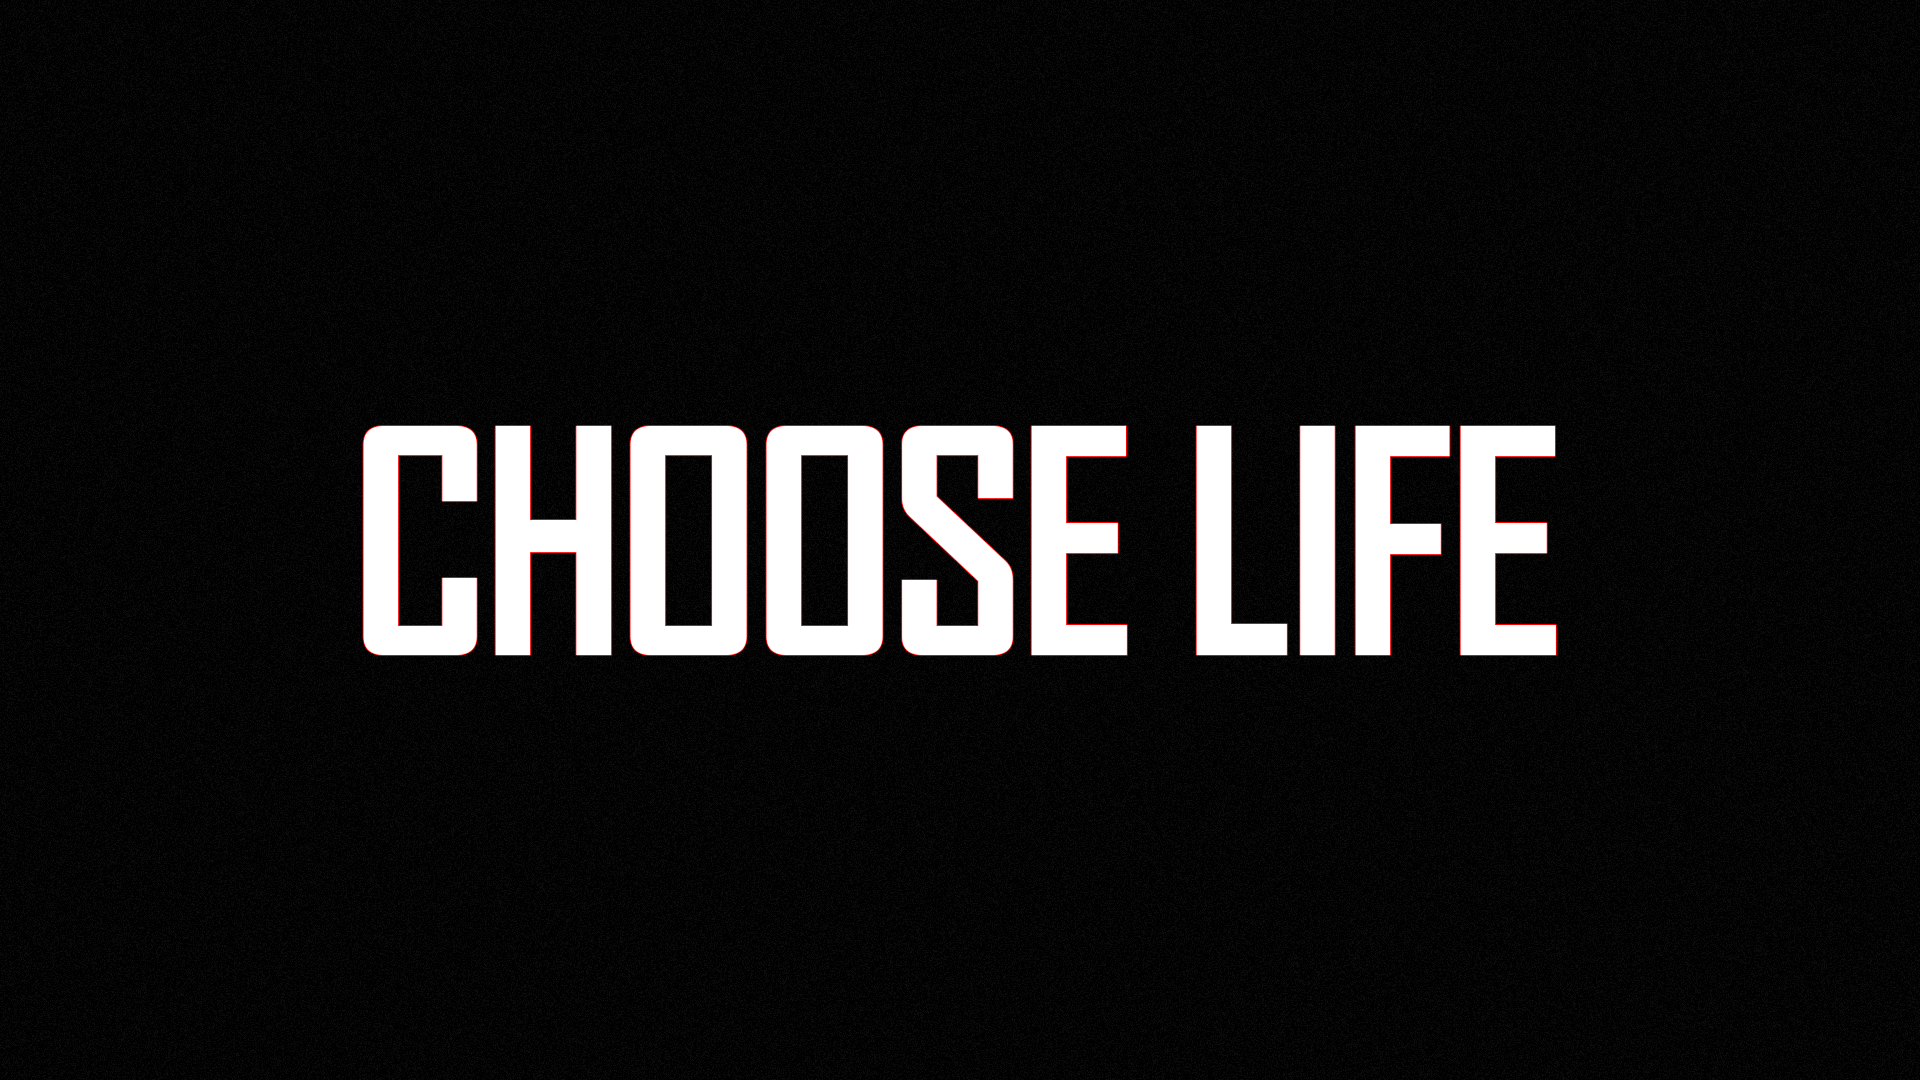 Life. Choose Life. Choose Future choose Life. Choose your Life.